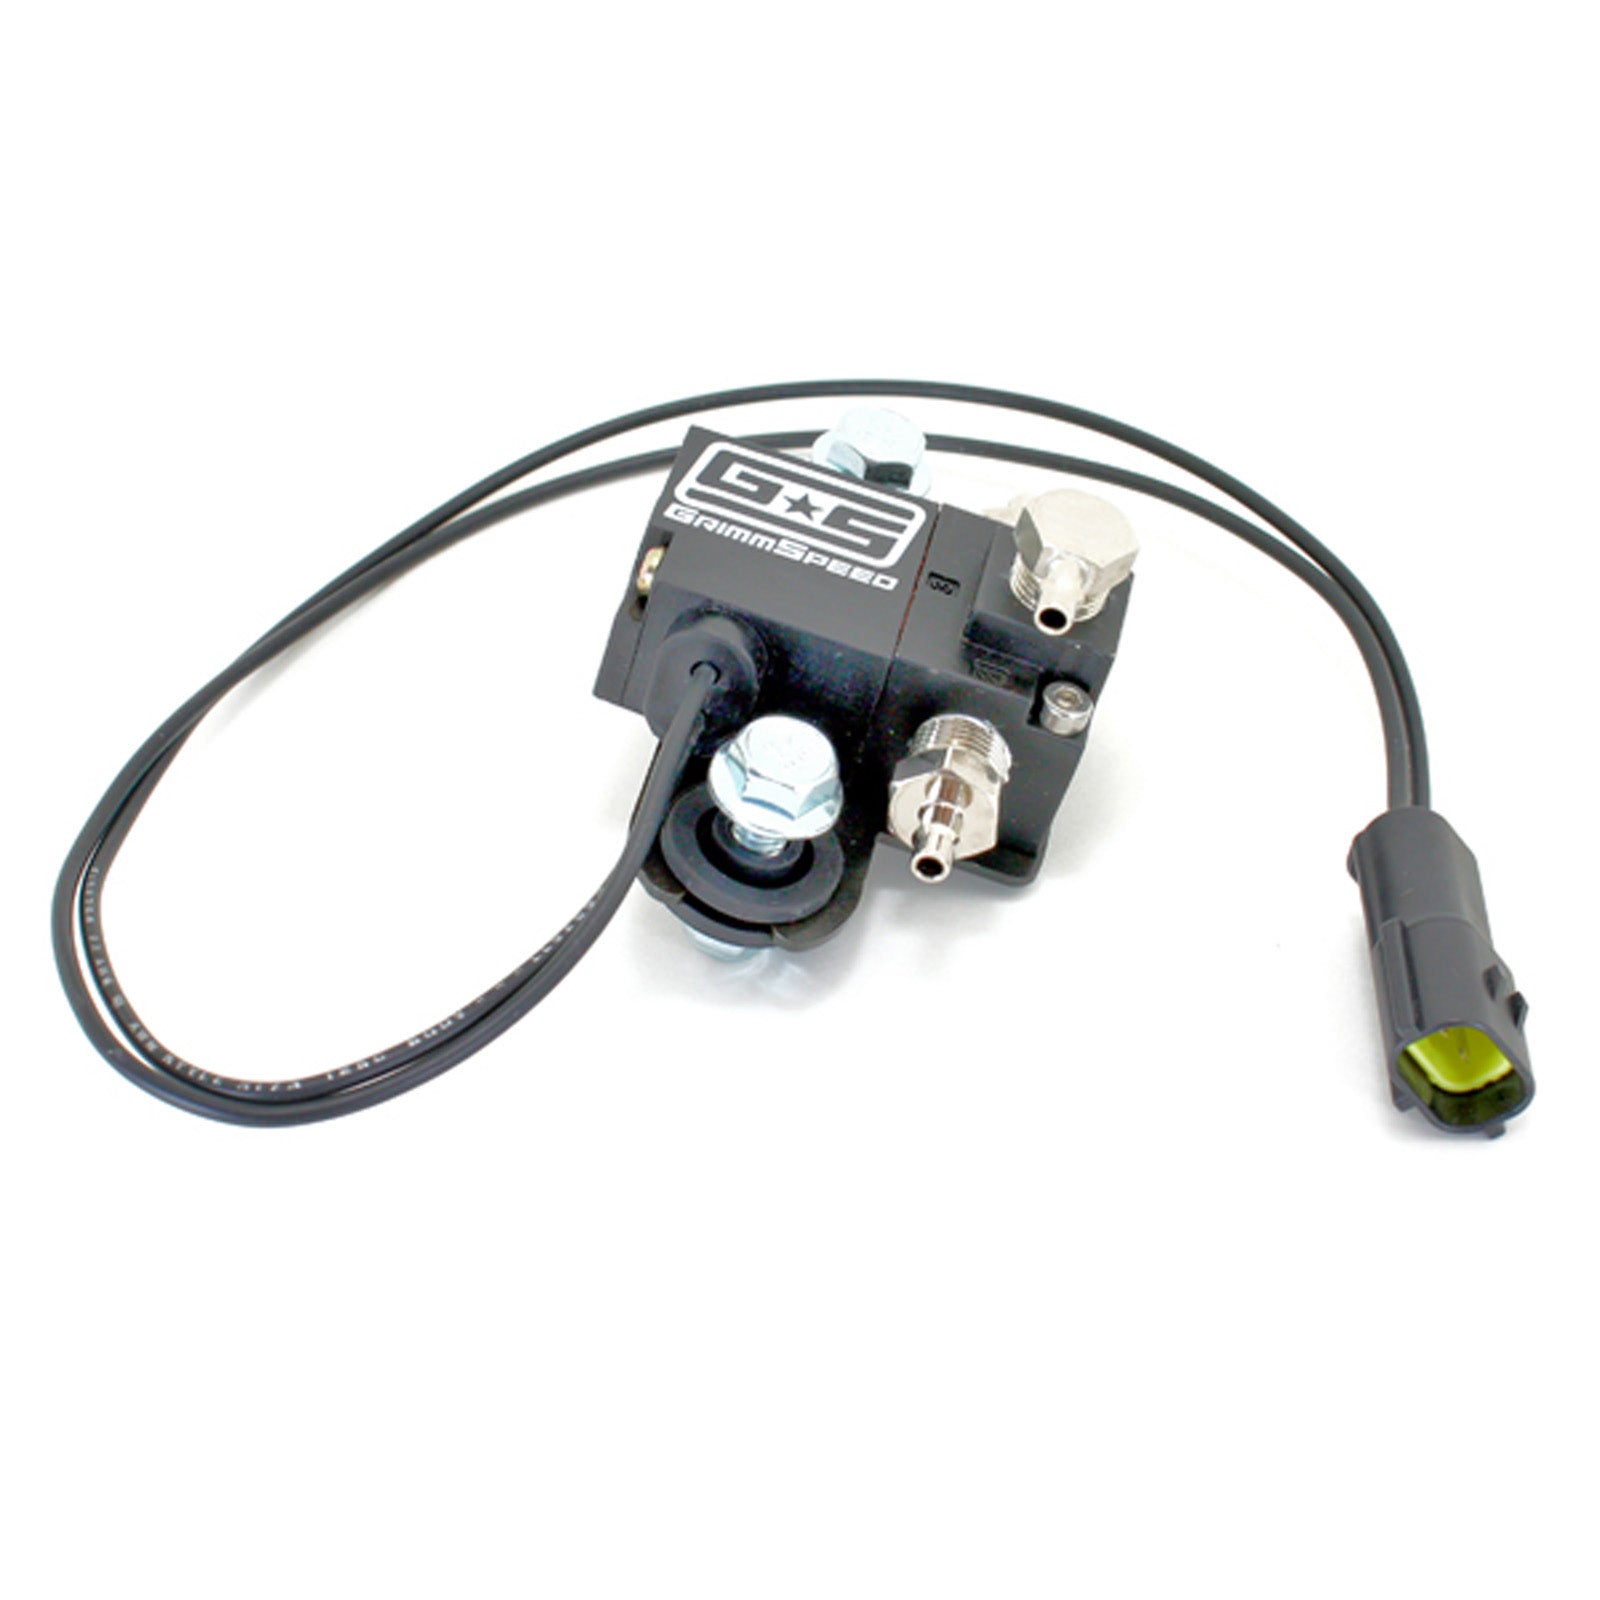 GrimmSpeed 3-Port Electronic Boost Control Solenoid - 2007-13 MazdaSpeed3